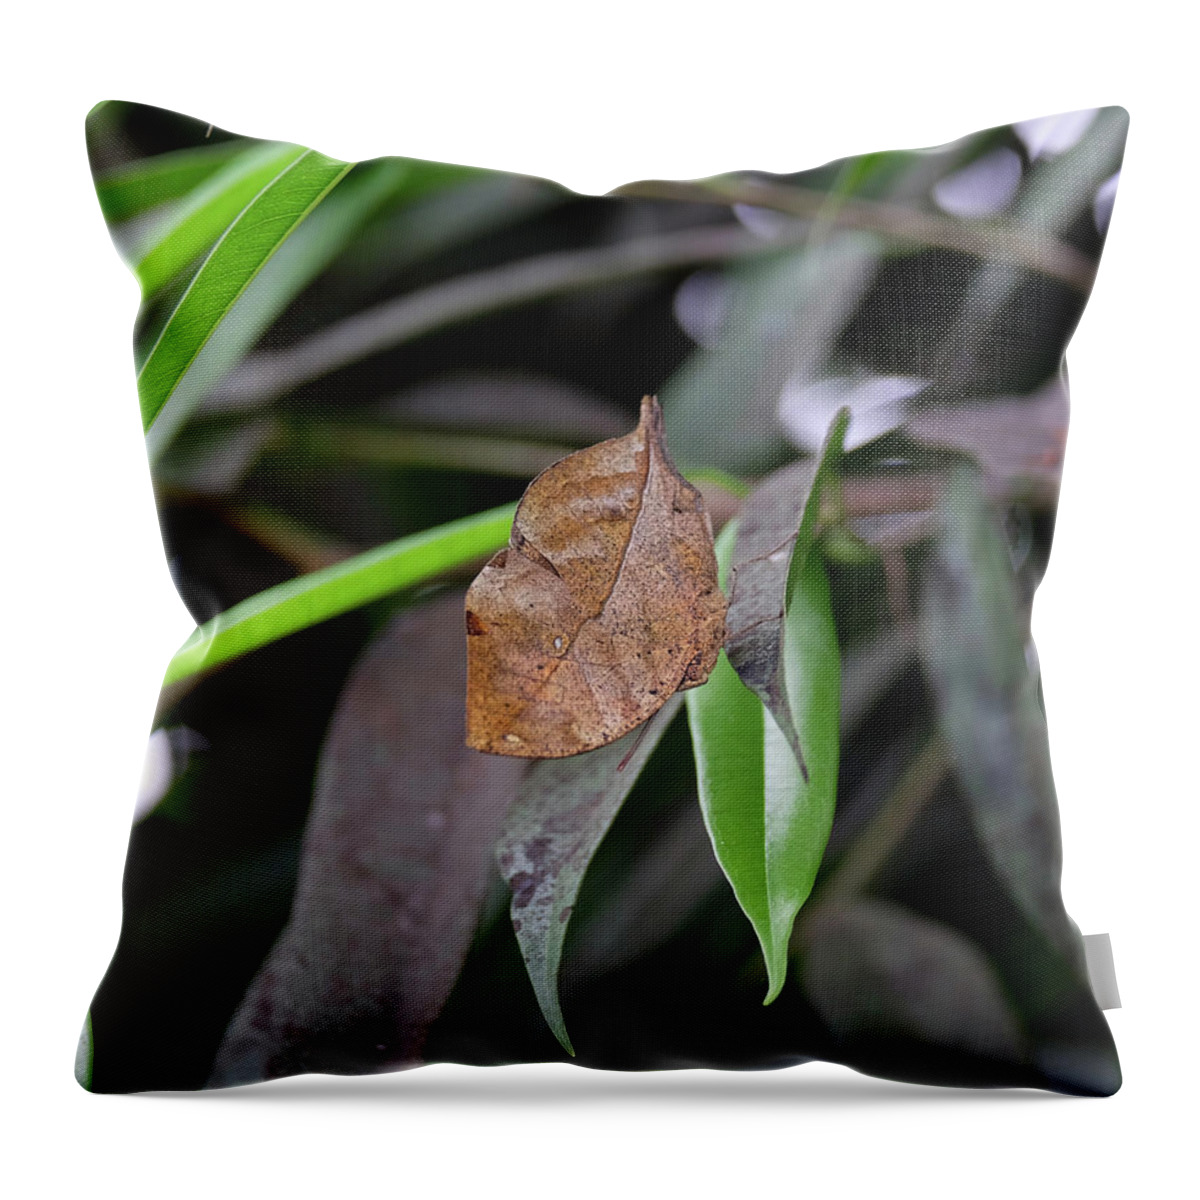 Deadleaf Butterfly Throw Pillow featuring the photograph Deadleaf butterfly closed by Ronda Ryan